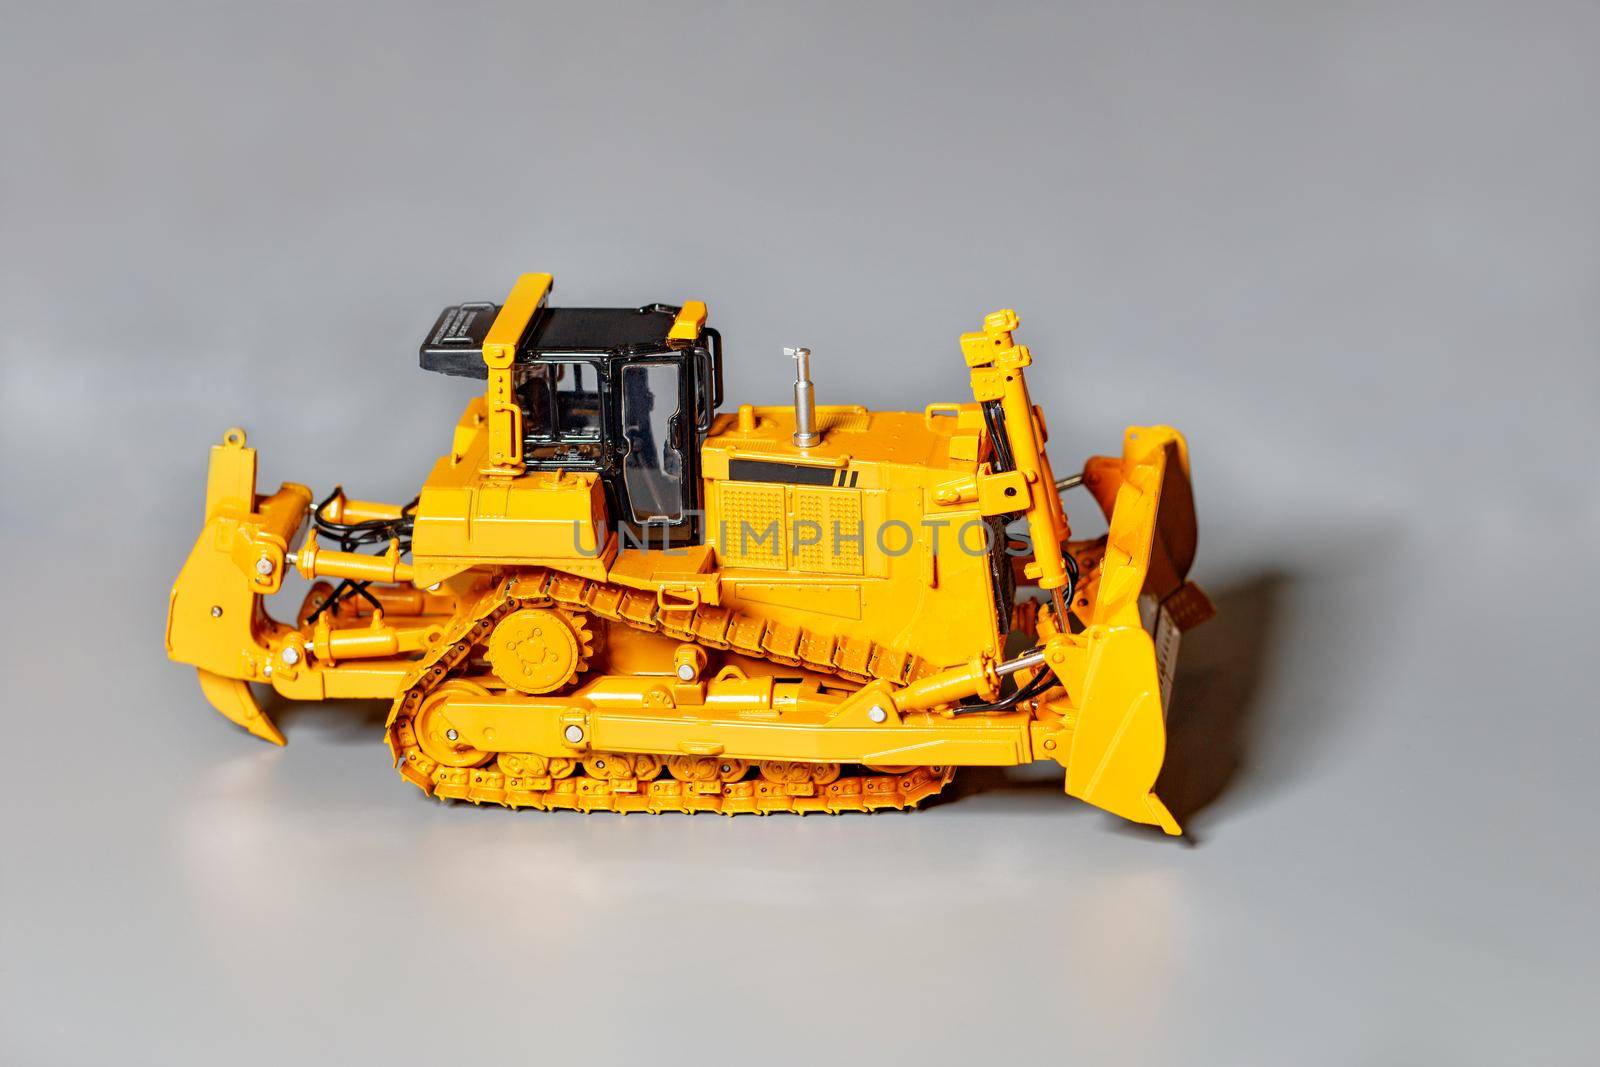 Toy model of a construction bulldozer on a light gray background. by Sergii